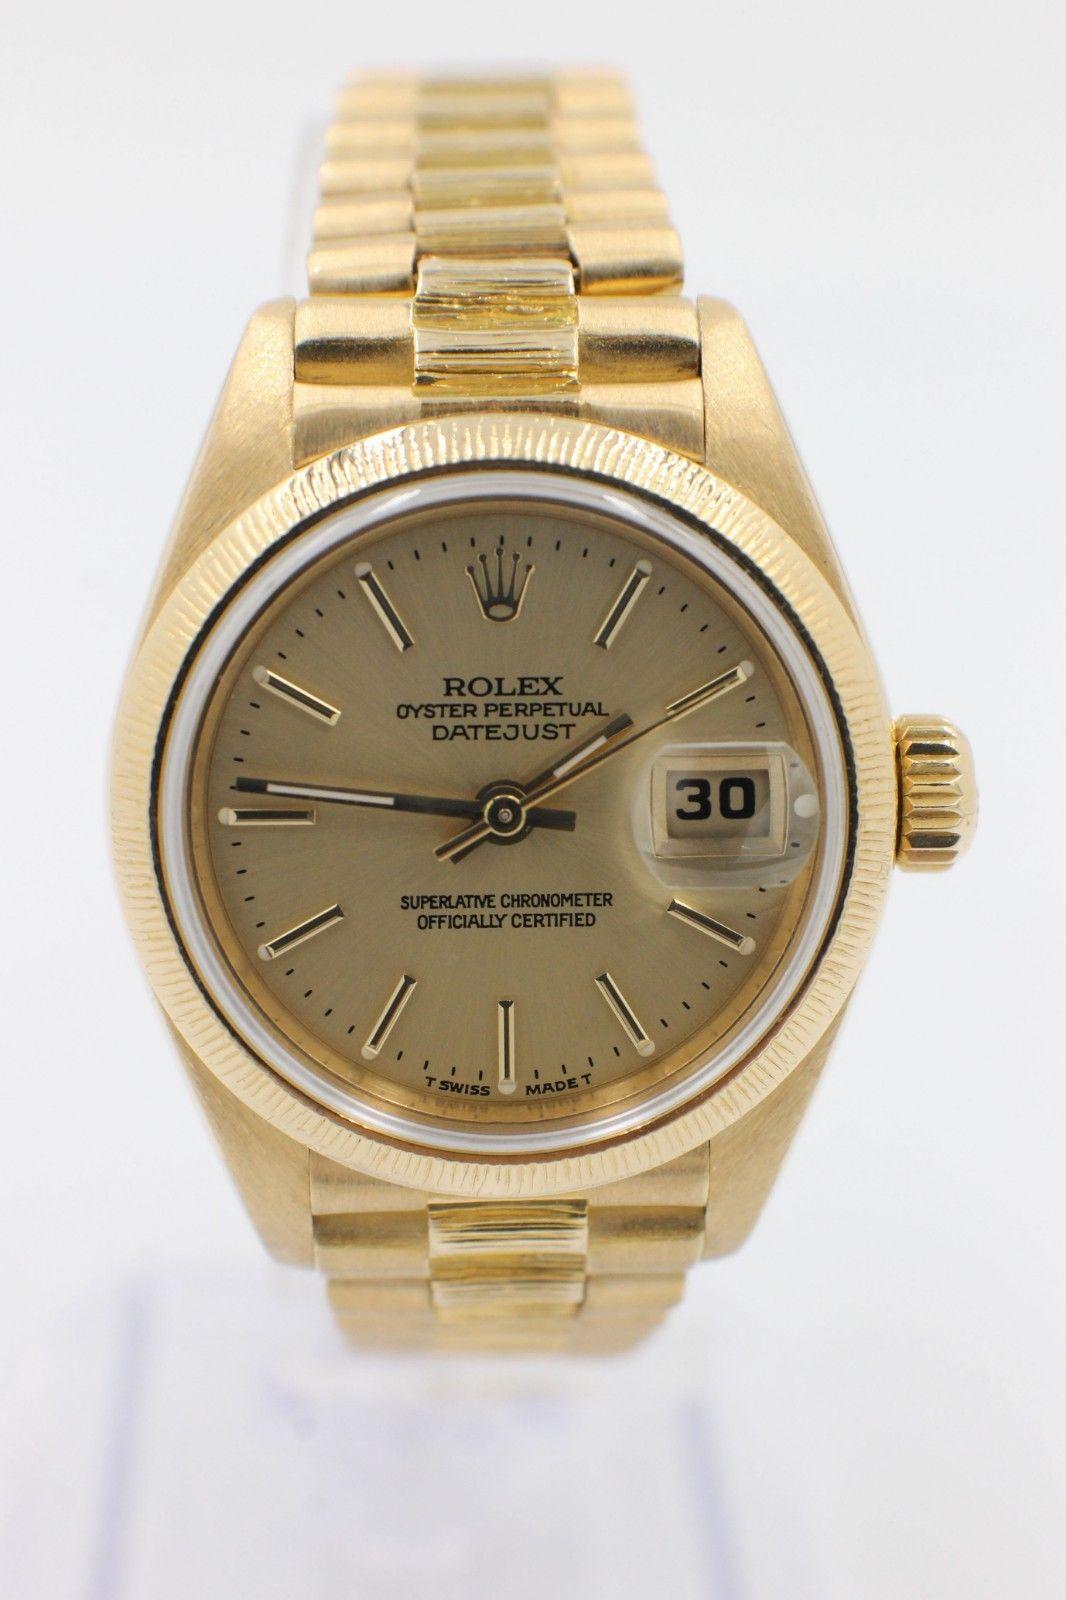 Style Number: 69278

Serial: 7660**

Model: Datejust Ladies President 

Case: 26mm

Band: 18K Yellow Gold

Bezel: 18K Yellow Gold

Dial: Champagne

Face: Acrylic

Case Size:

Includes: 

-Elegant Watch Box

-Certified Appraisal 

-6 Month Warranty